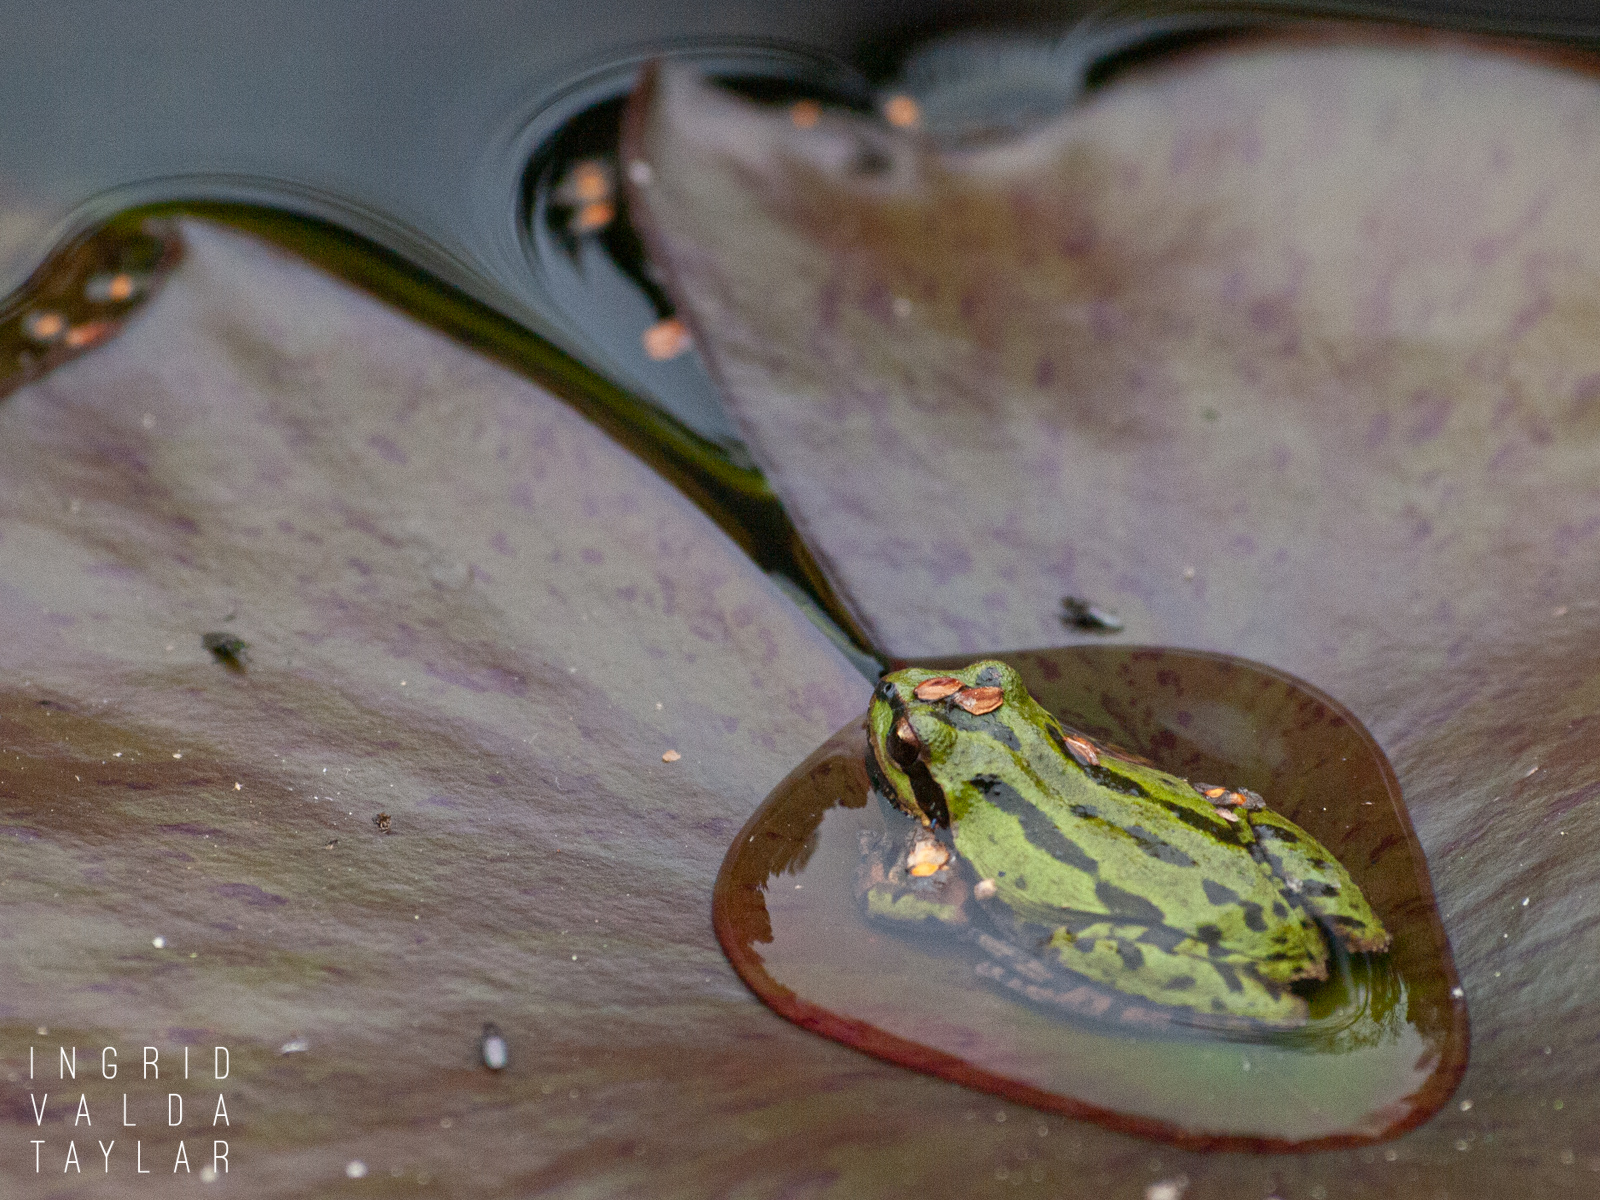 Pacific Chorus Frog in Water Droplet